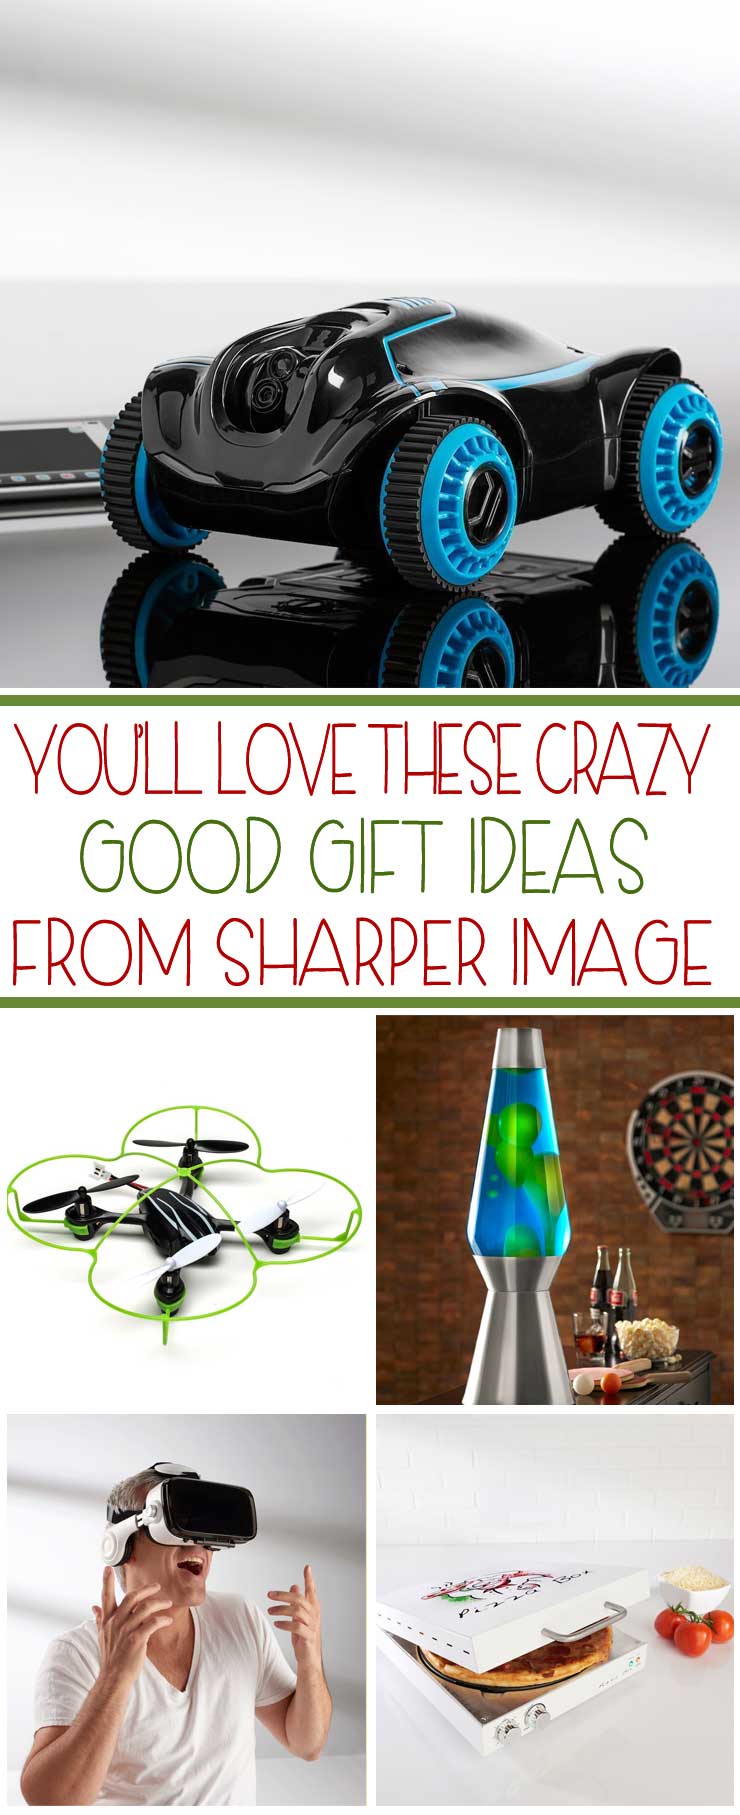 You'll Love These Crazy Good Gift Ideas From Sharper Image - TGIF